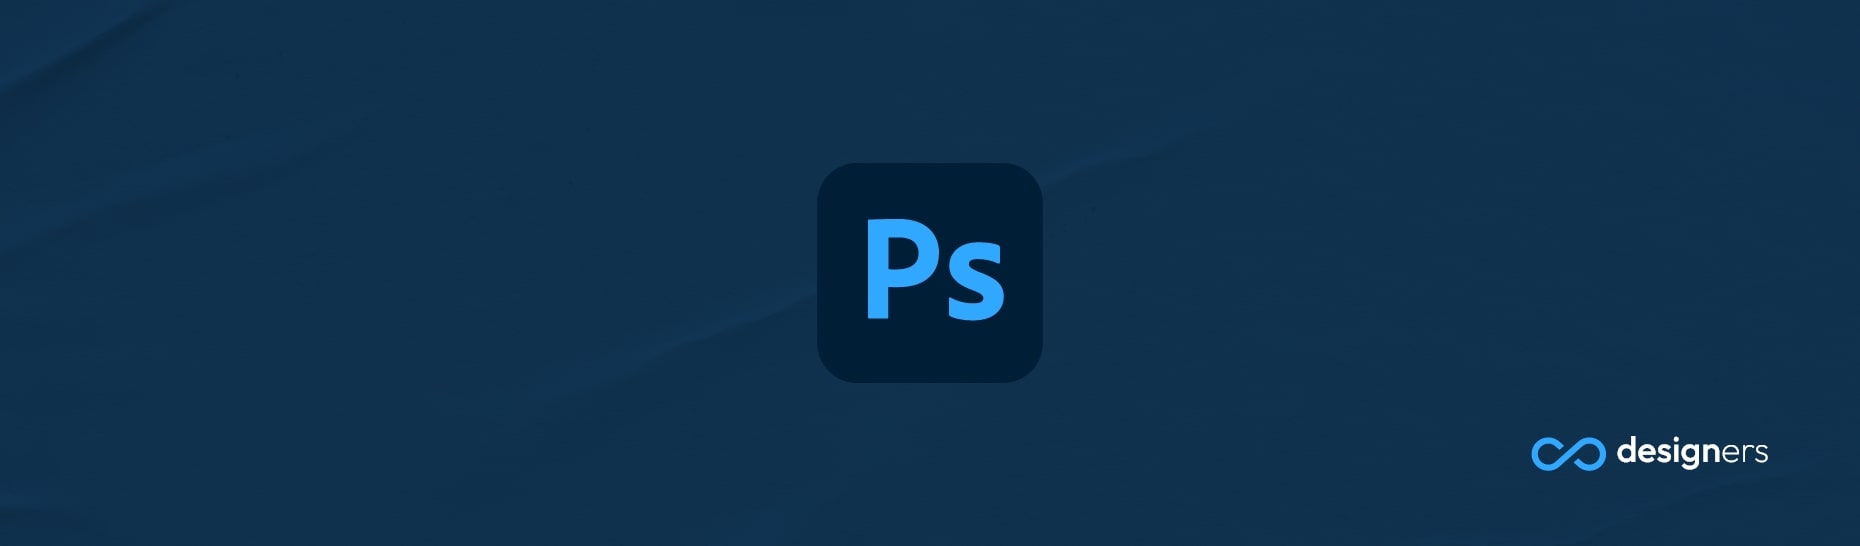 What Is the Best Size for a Logo in Photoshop?